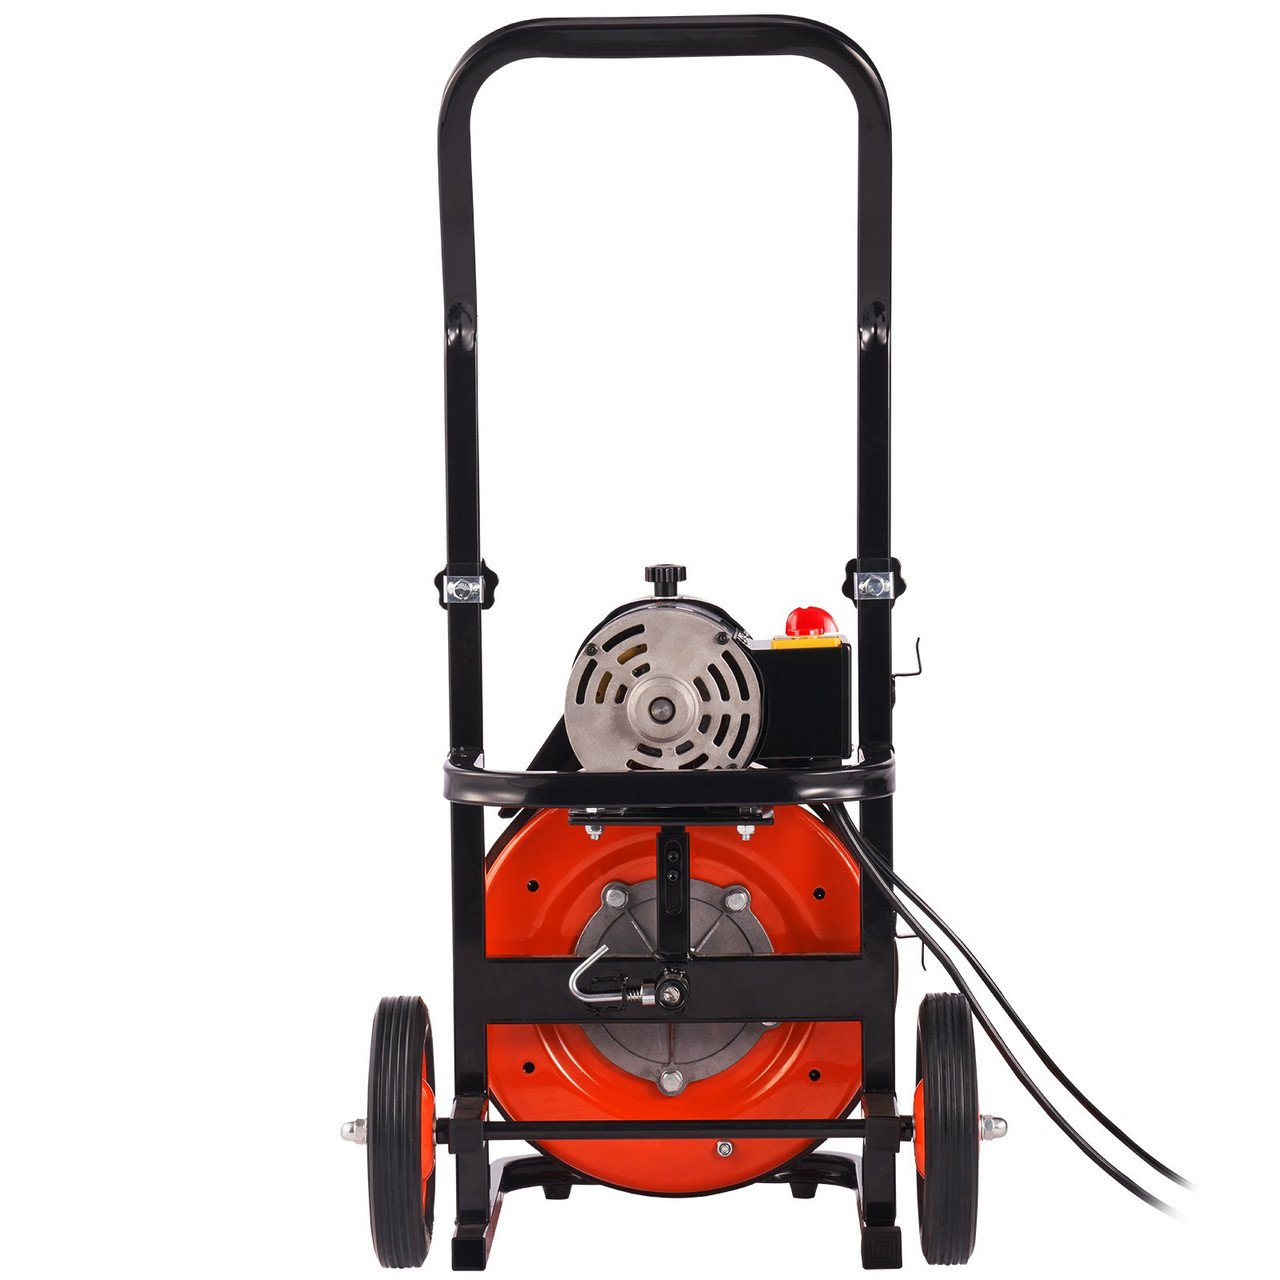 VEVOR Drain Cleaning Machine 75 FT x 1/2 Inch, Sewer Snake Machine Auto Feed, Drain Auger Cleaner with 4 Cutter & Air-Activated Foot Switch for 1" to 4" Pipes